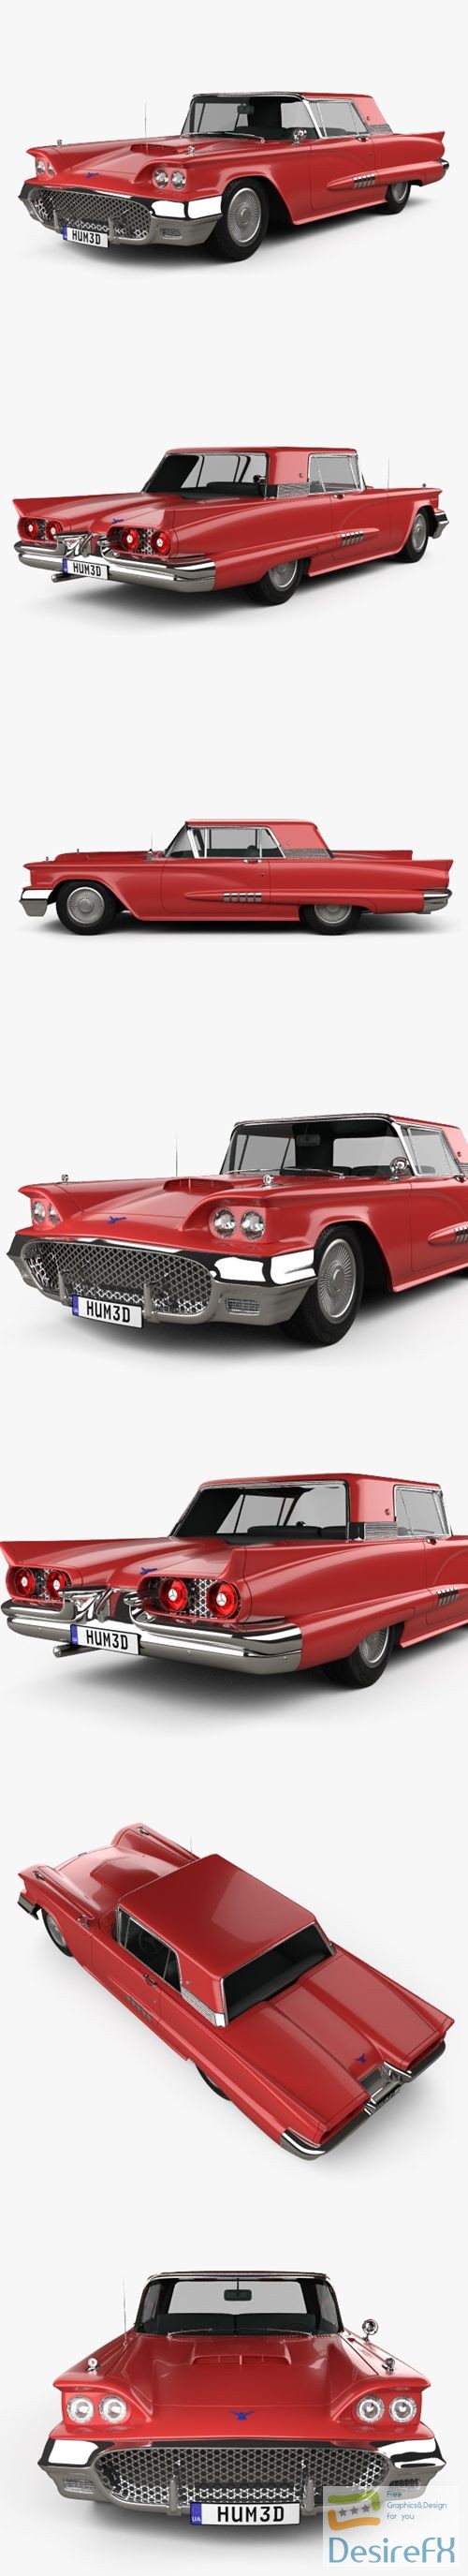 Ford Thunderbird Sport Coupe 1958 3D Model